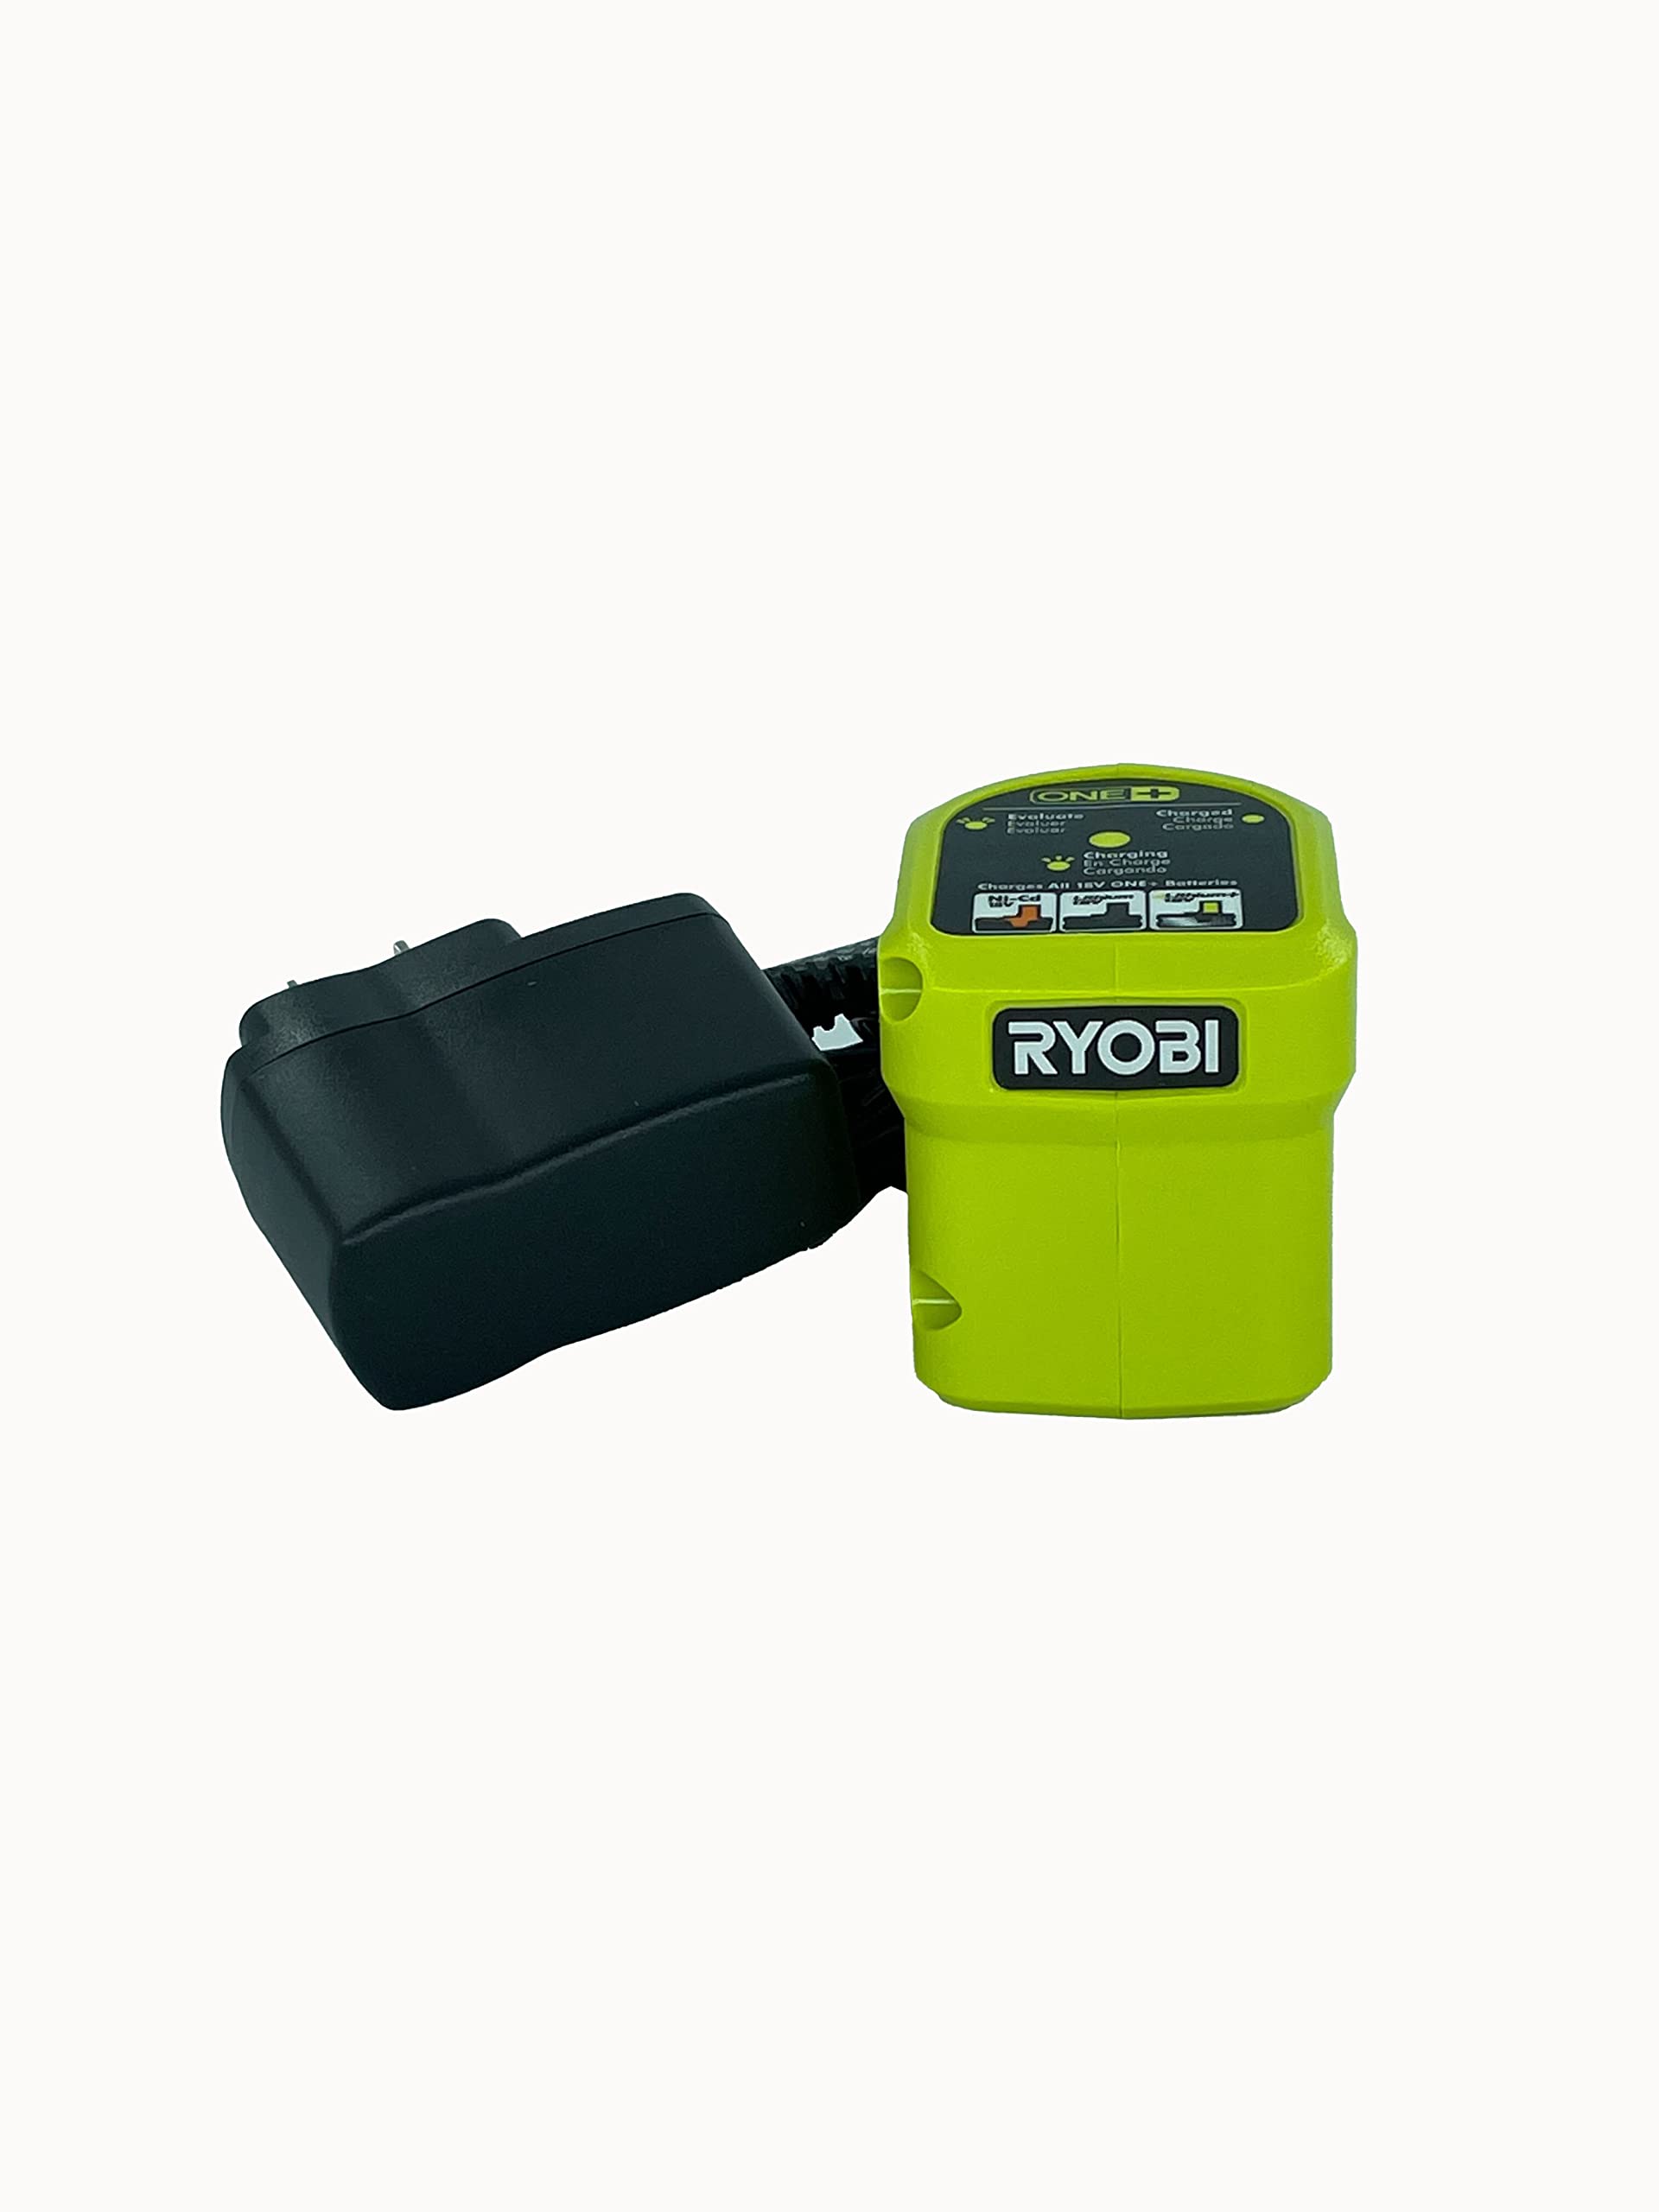 RYOBI 18V ONE+ Lithium-Ion Cordless 1/4-inch Impact Driver Kit with 1.5 Ah Battery and Charger - PCL235K1